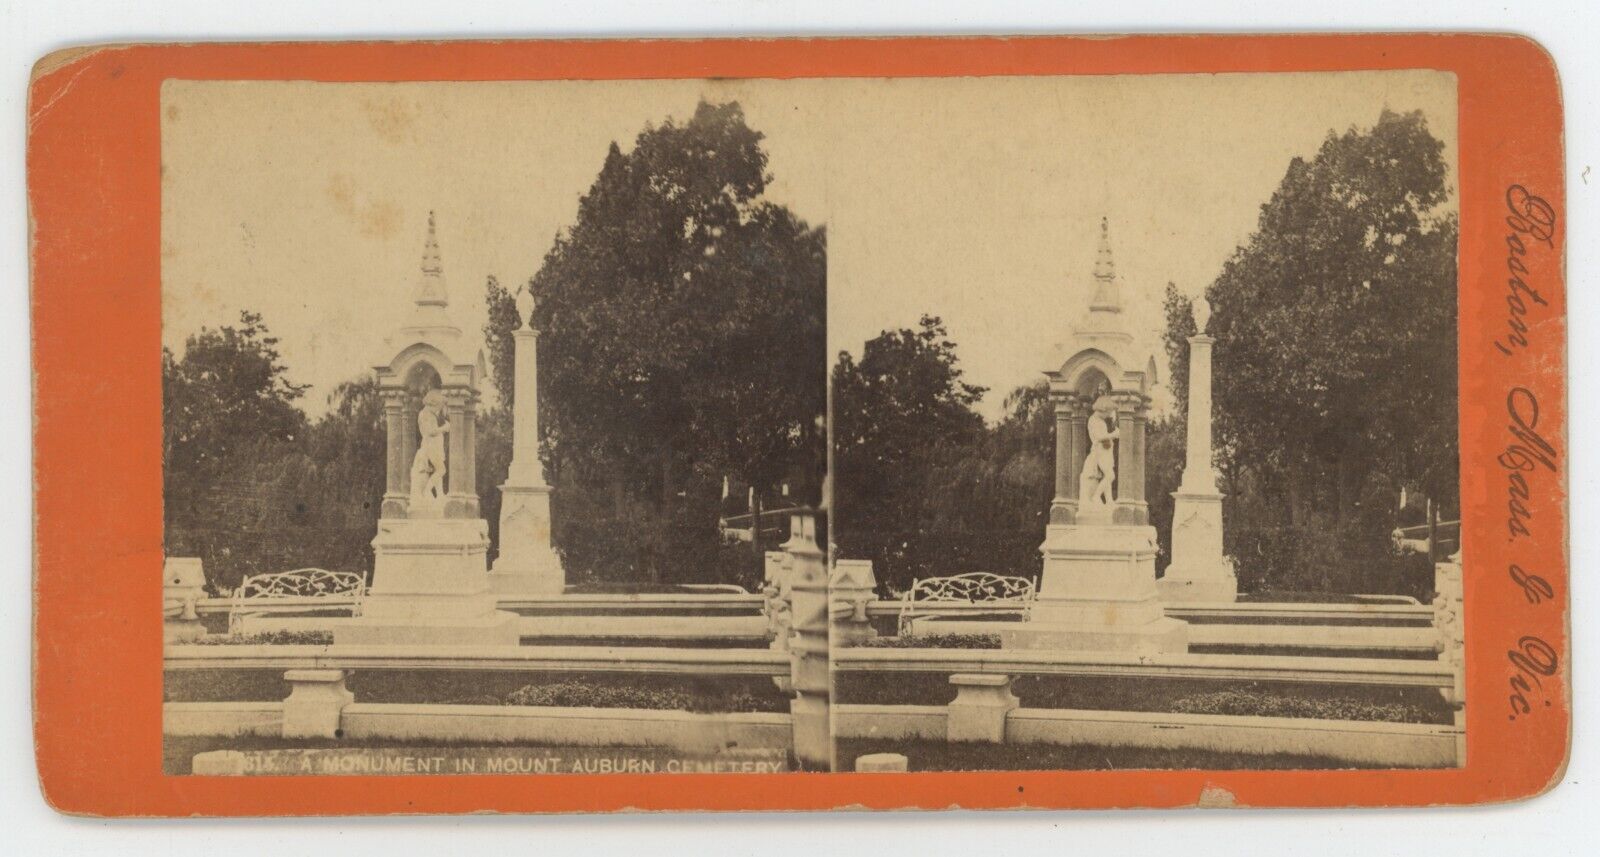 c1900's  Real Photo Stereoview A Monument in Mount Auburn Cemetery Boston, MA